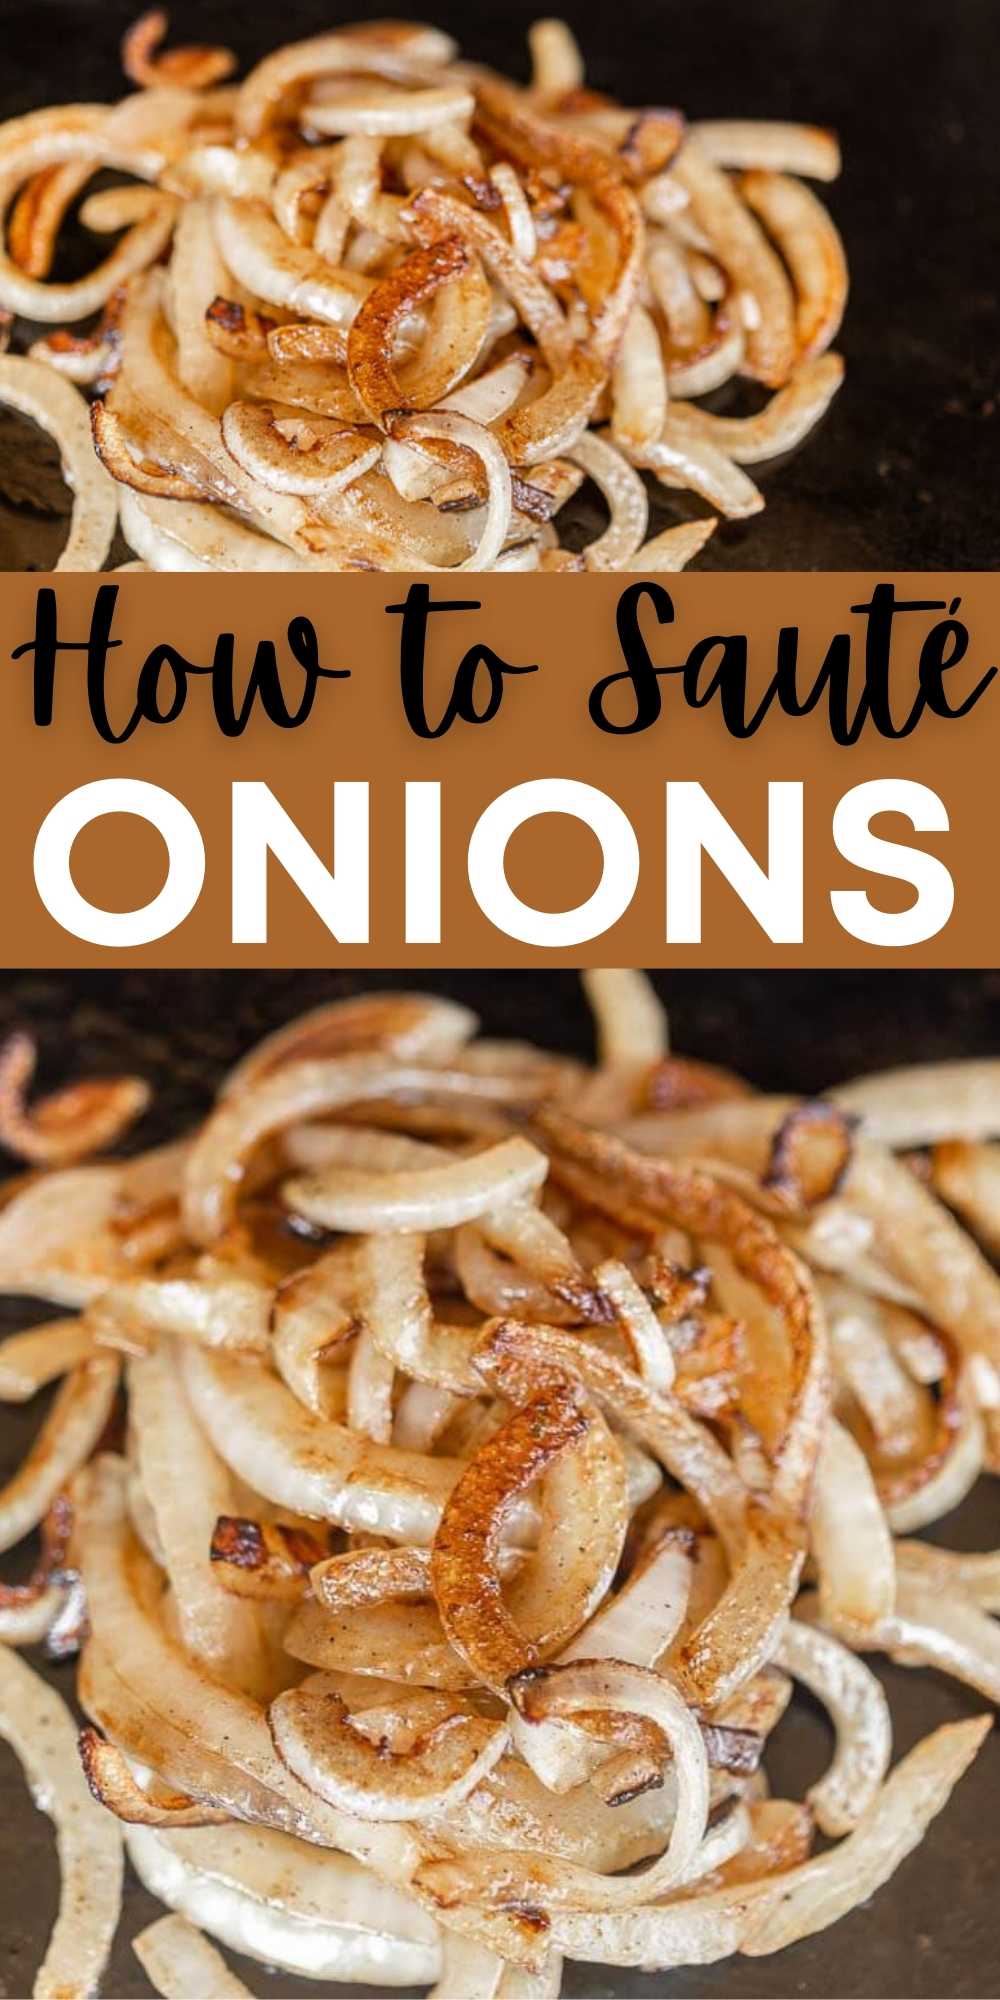 Learn how to Sauté Onions perfectly for burgers, a side dish and more. This flavorful sautéed onions recipe takes just minutes to make and are perfect for burgers and for steak too! #eatingonadime #howto #sautéonions #sautéedonions #sidedishes #sidedishrecipes 
